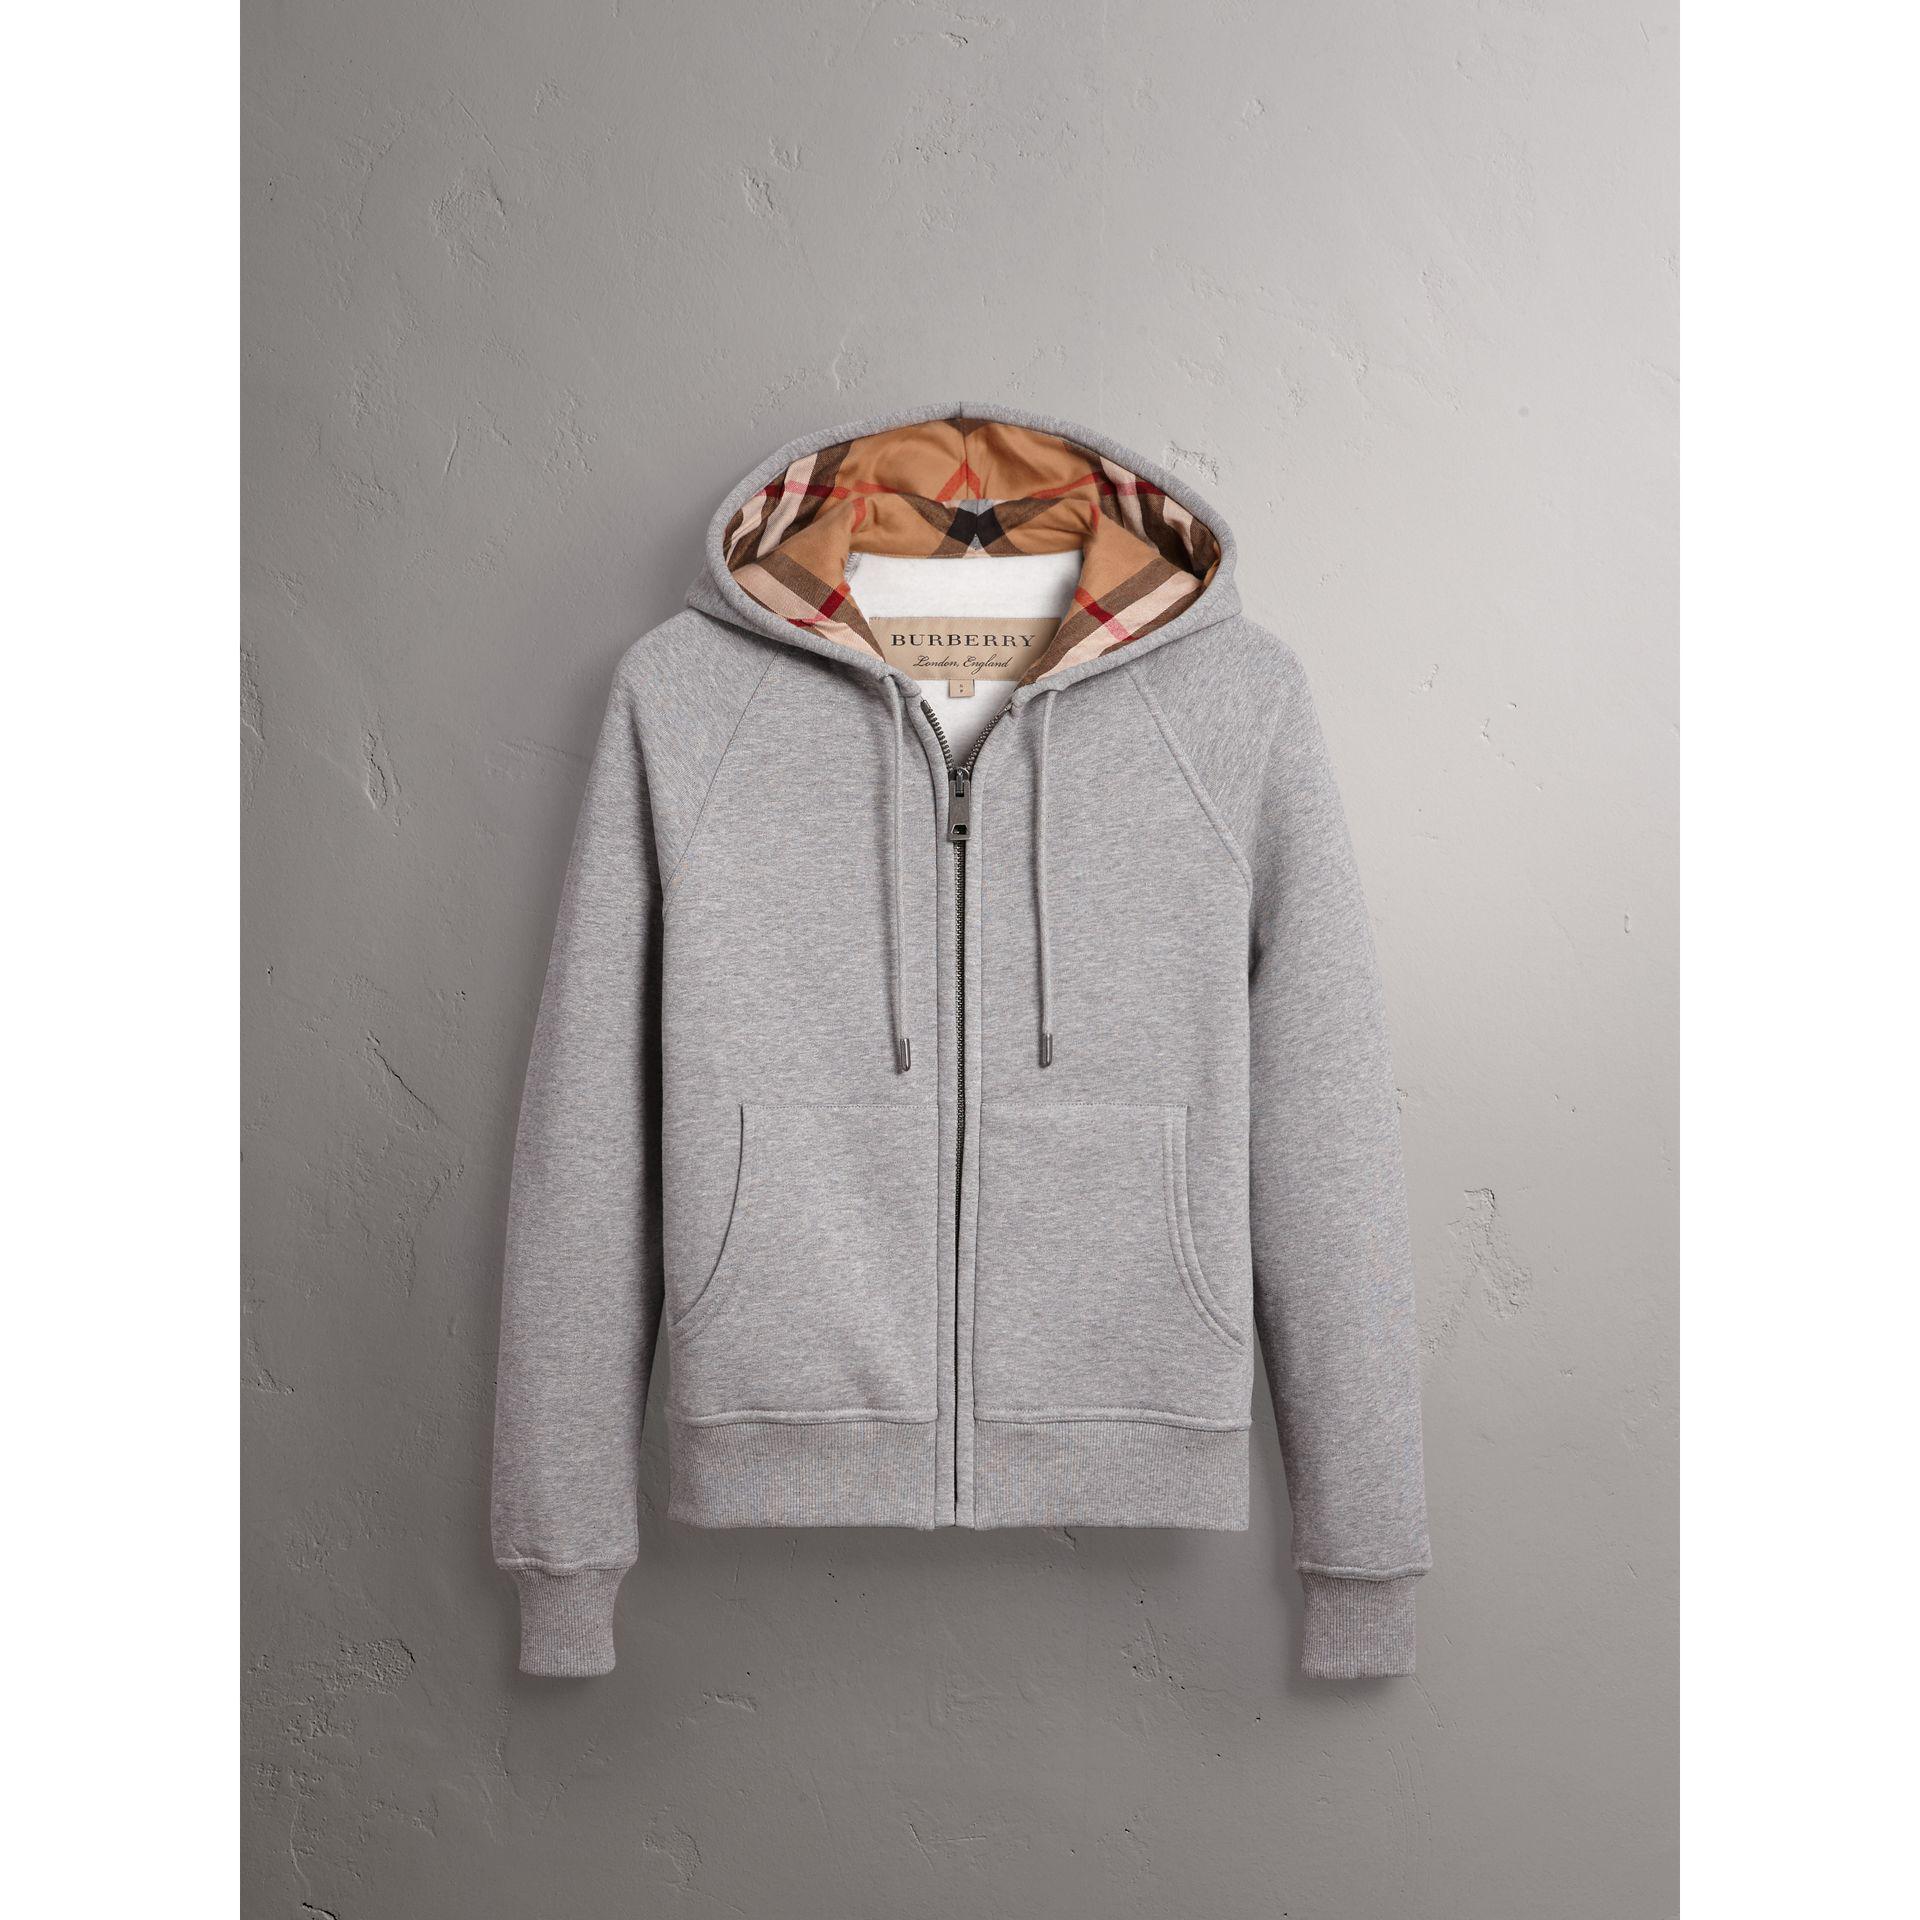 *Burberry Gray Hooded Zip Up Jacket Small